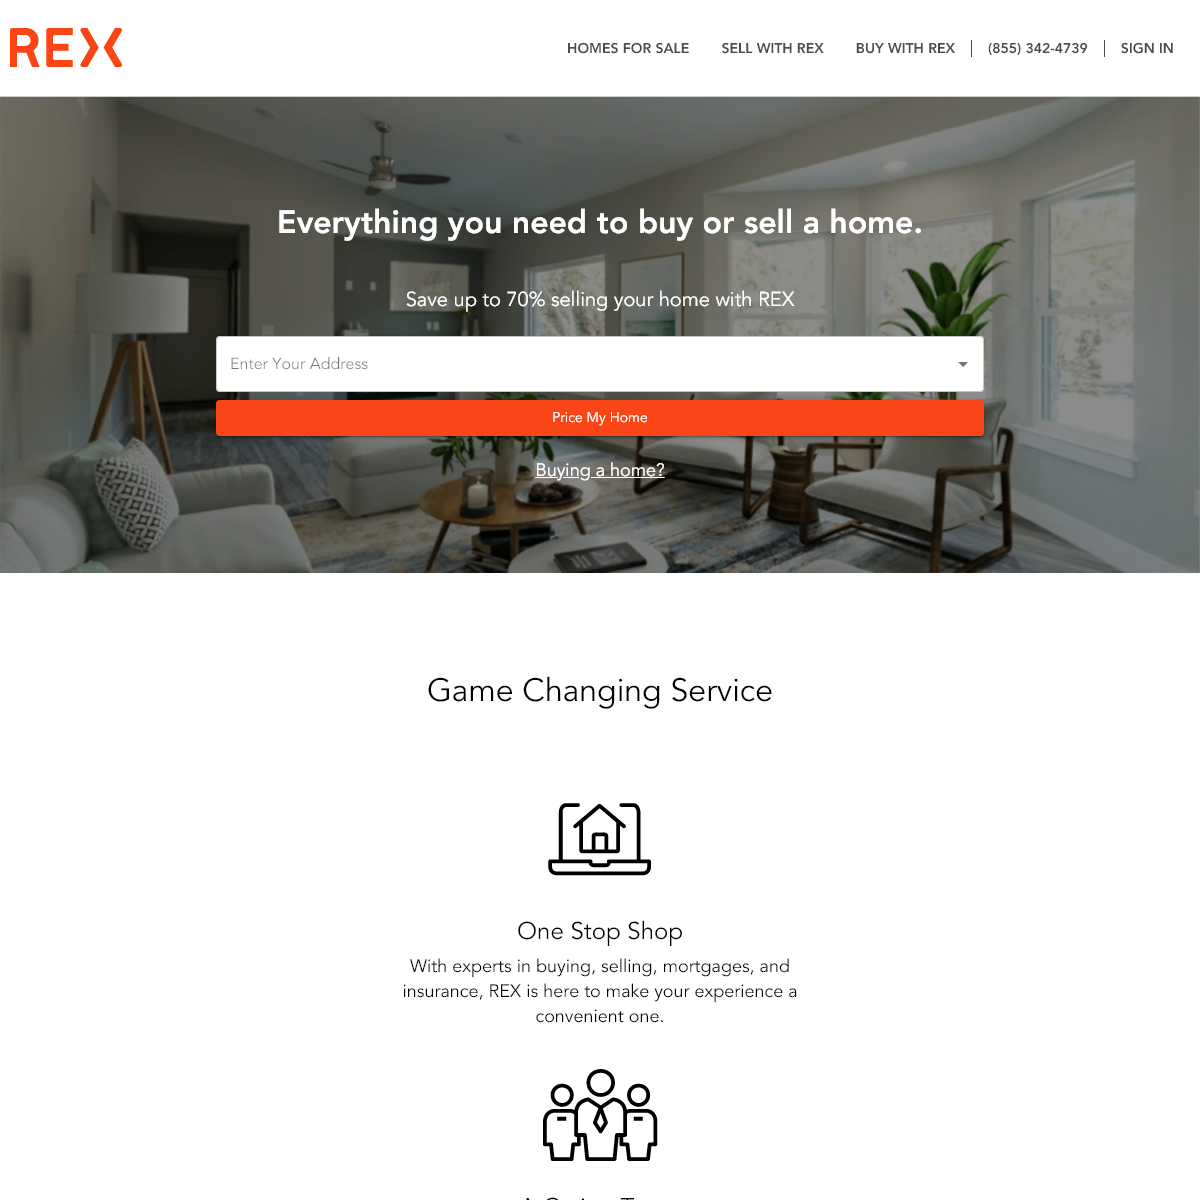 A complete backup of rexhomes.com